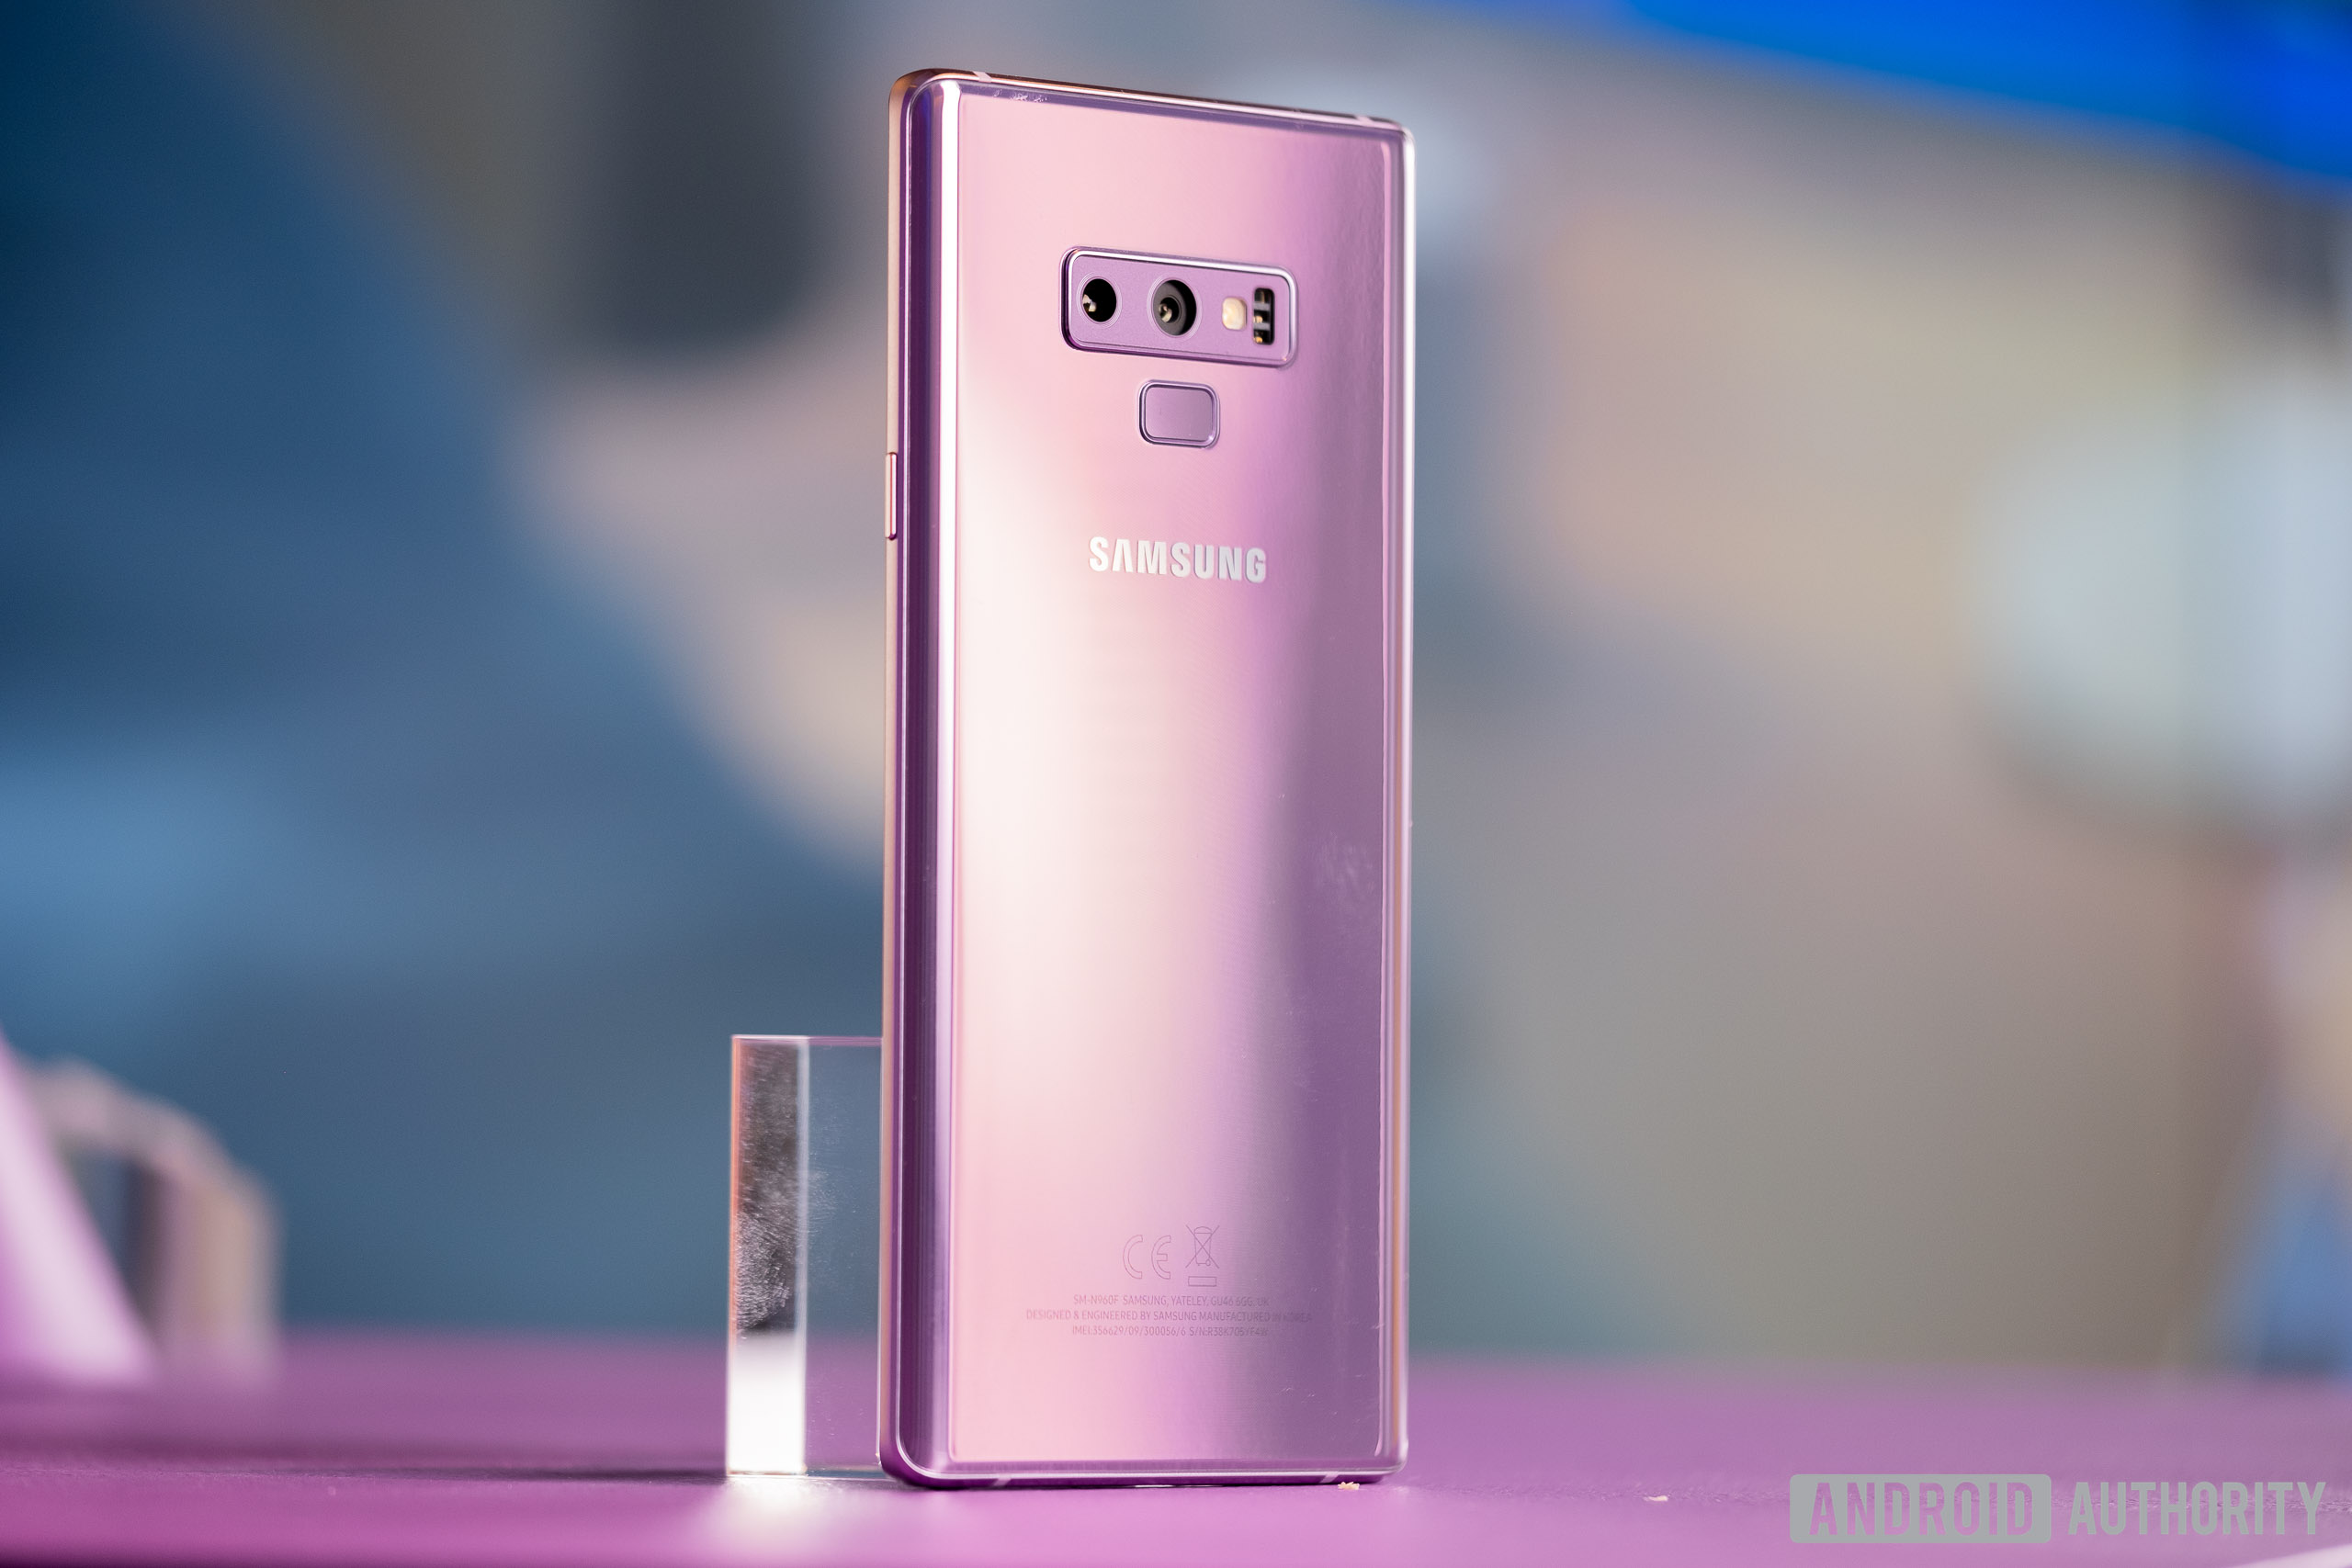 Samsung Galaxy Note 9: Hands-on, specs, features, and more!
